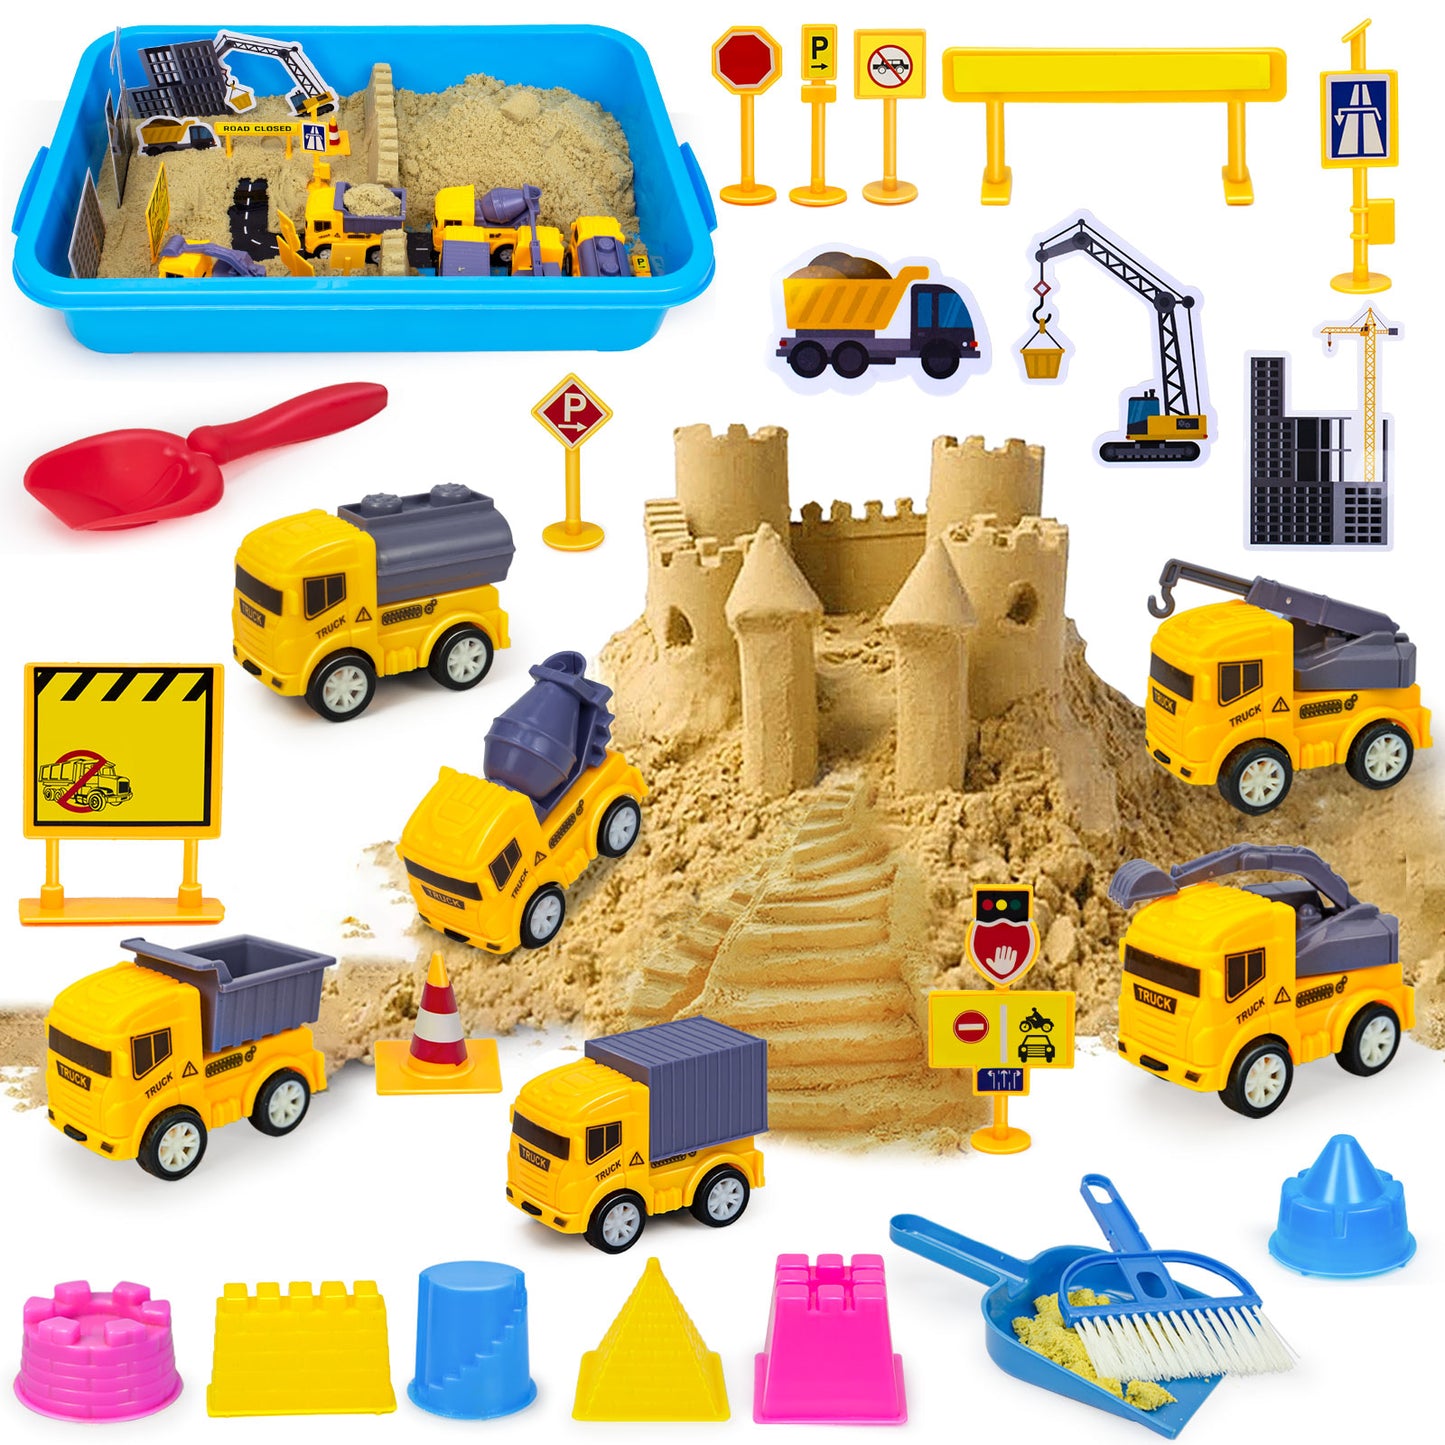 Construction Sand Toys, Kids Play Sand Kit Included 2.2lbs Magic Sand, Crane, 6 Construction Vehicles, 8 Signs, 12 Molds, Beach Building Sand Castle Sensory Bin Toy for Toddlers Boys